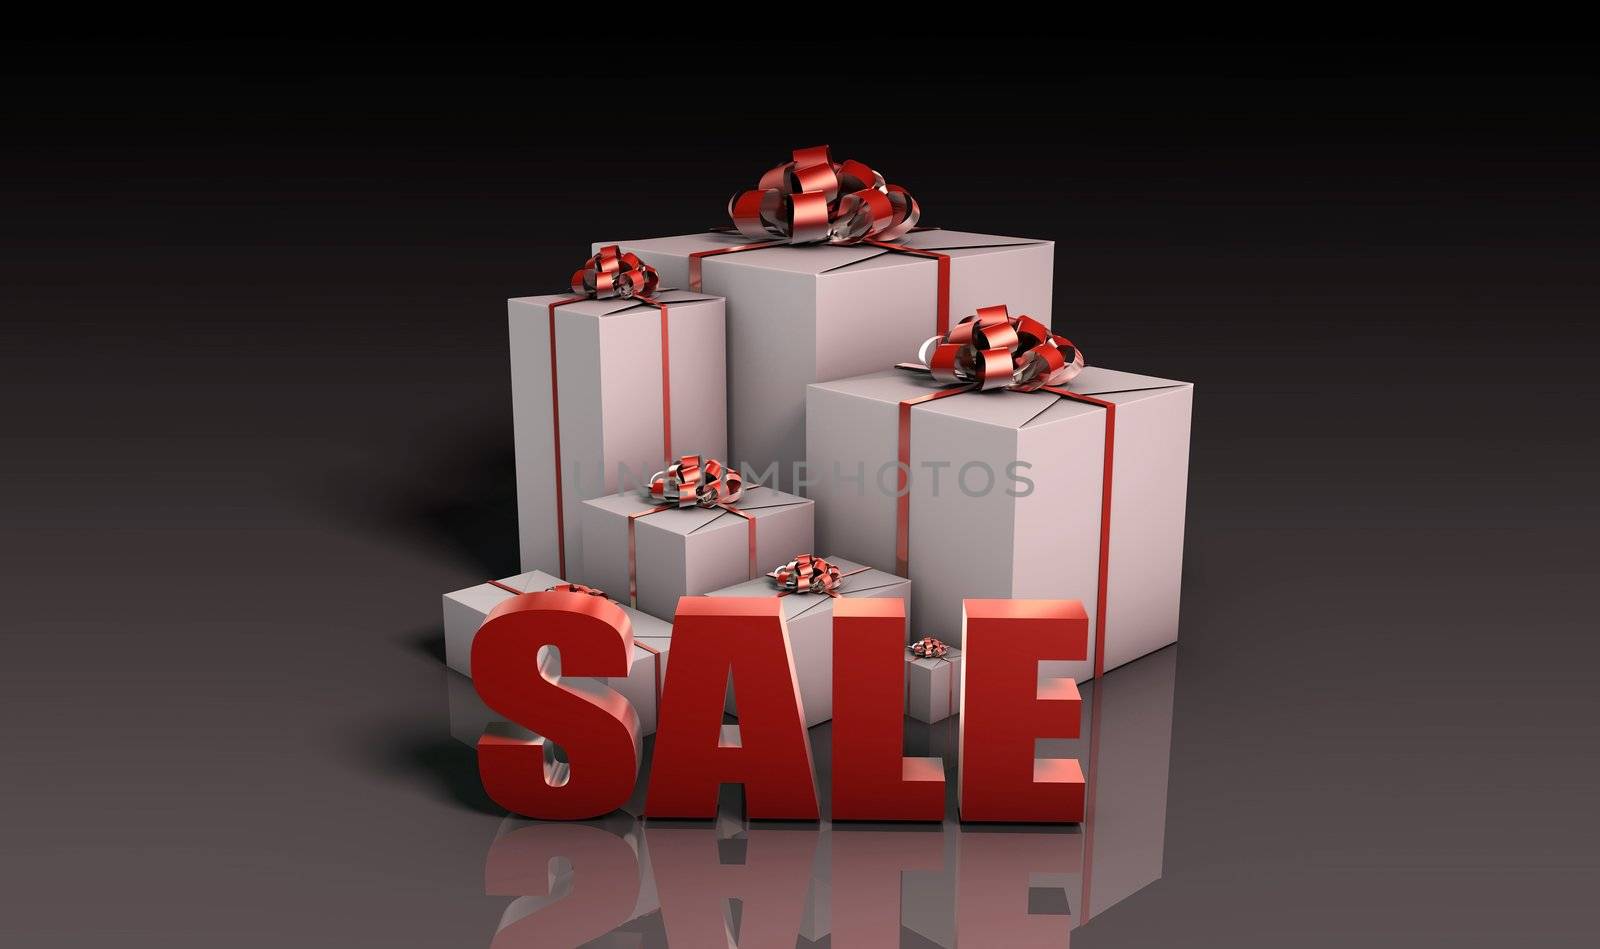 Sale Sign with Gift Boxes by kentoh